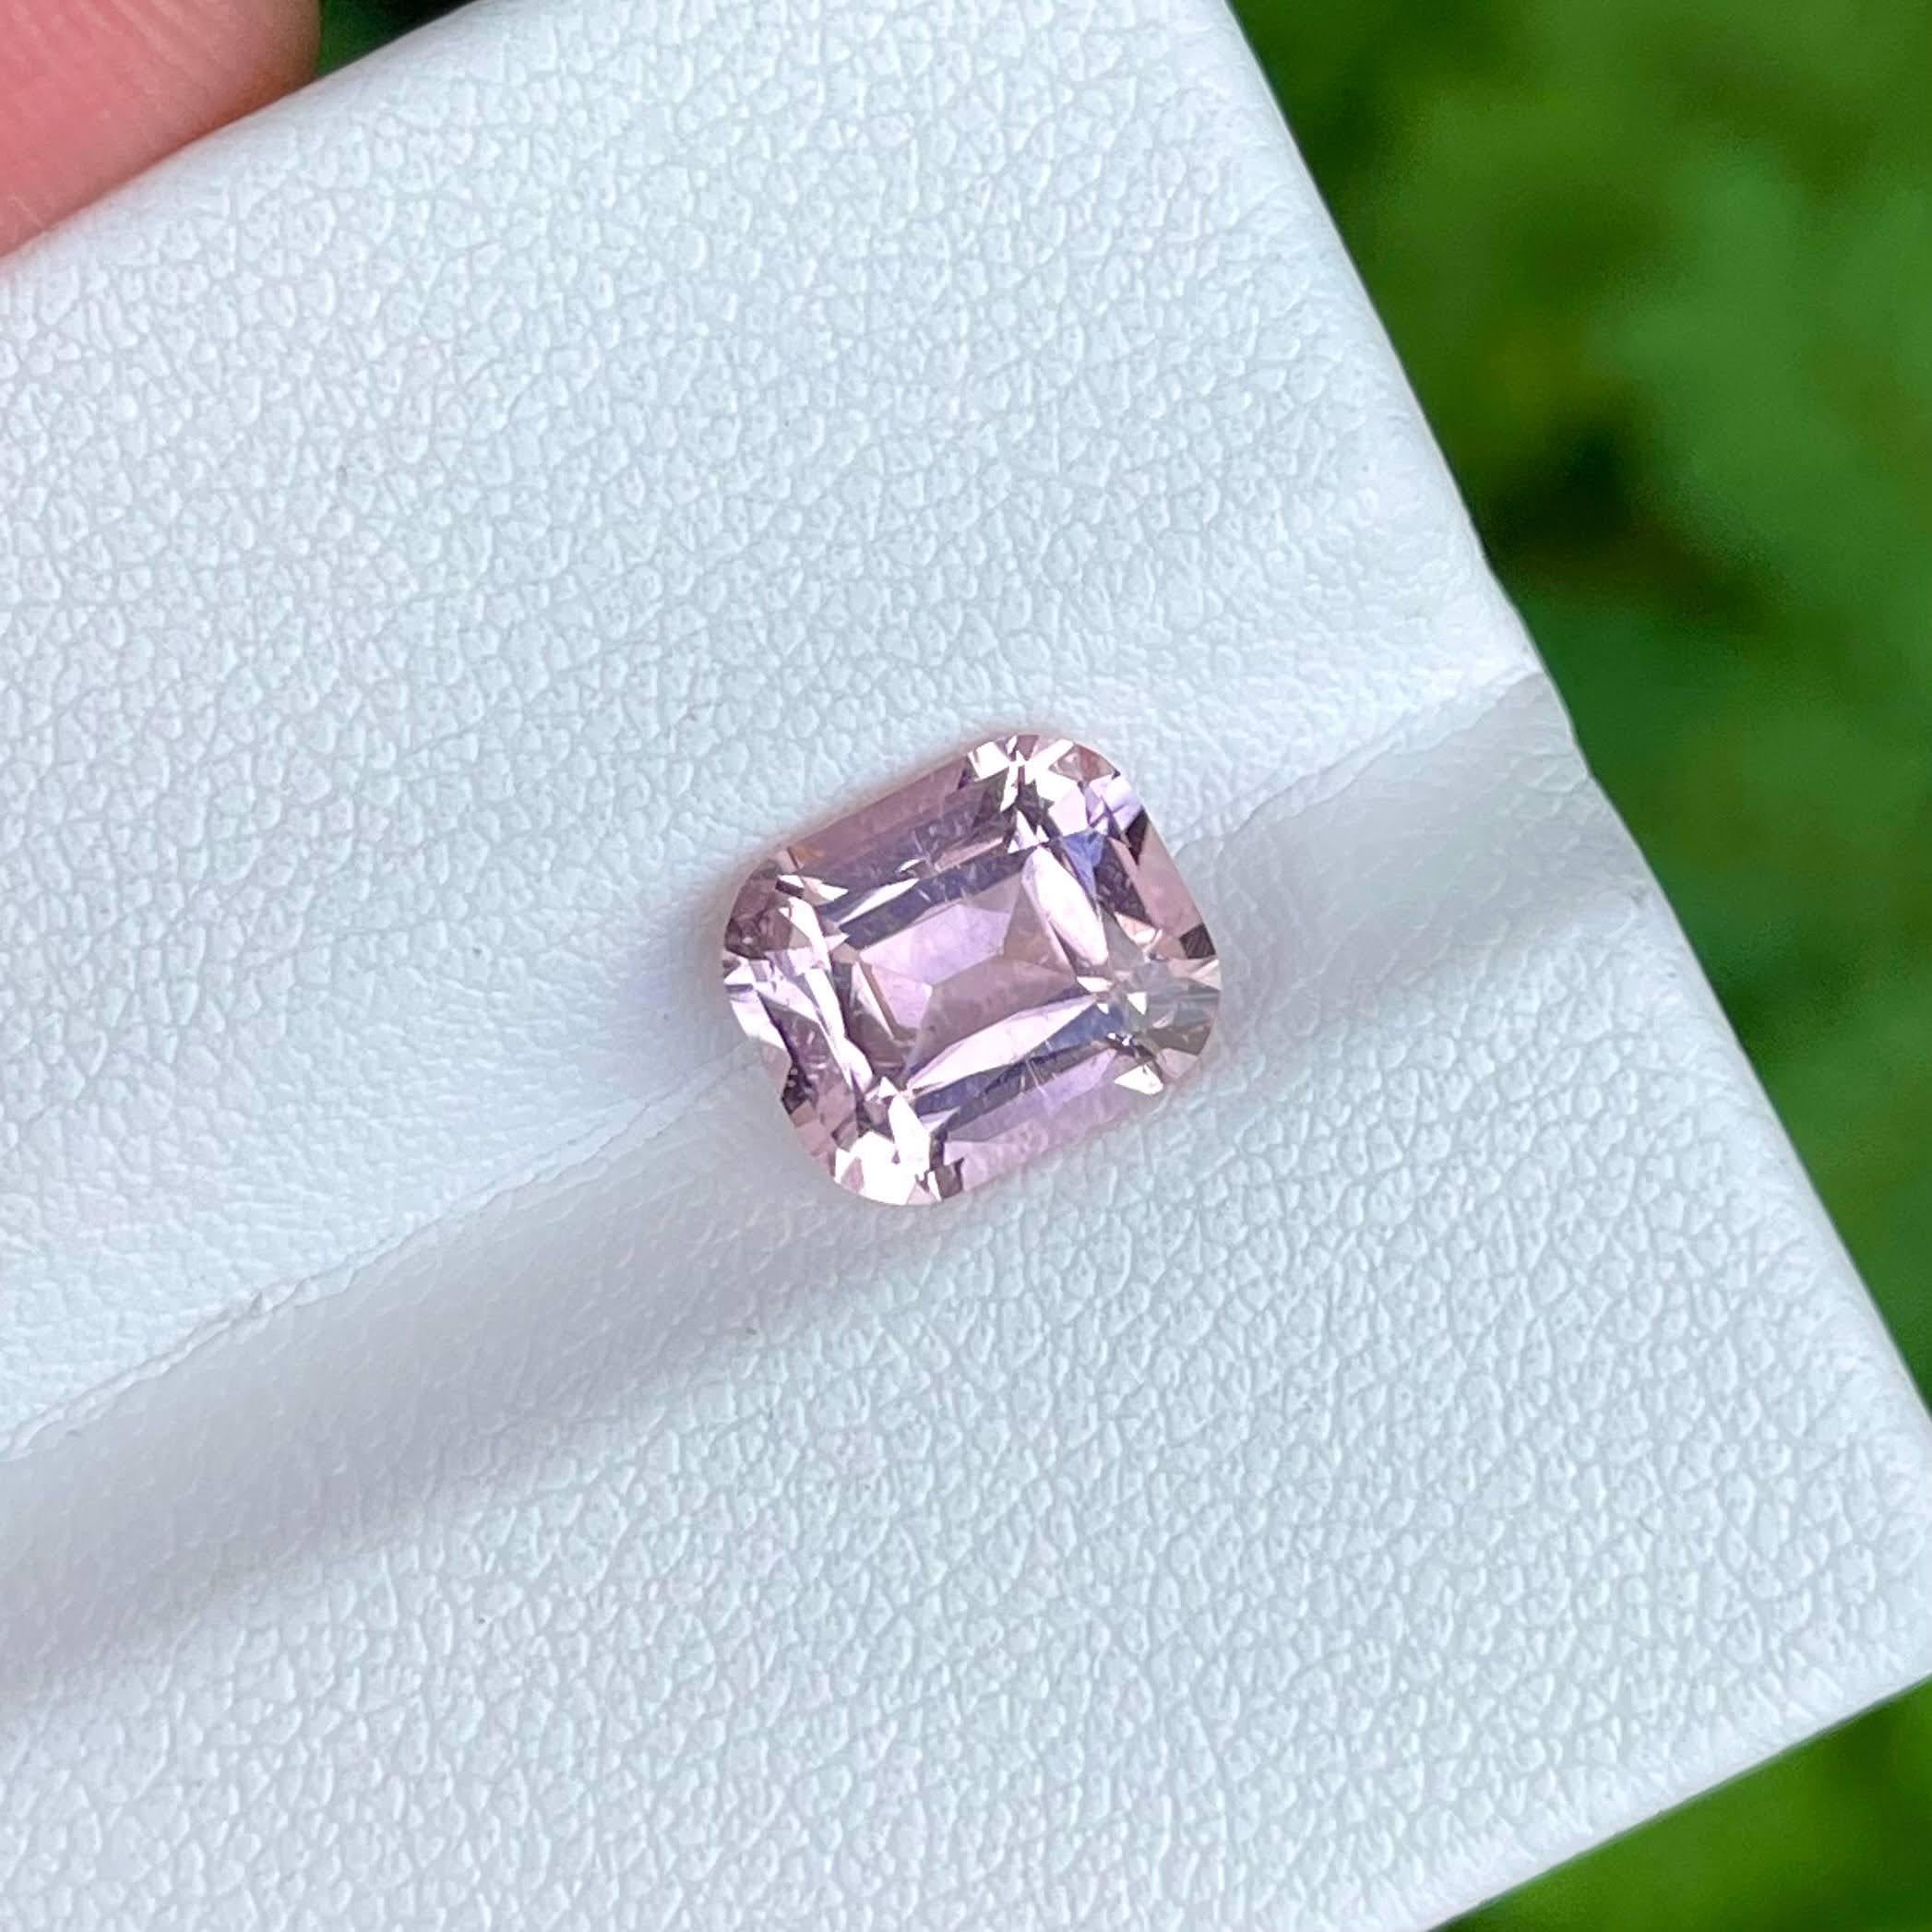 Gemstone Type Baby Pink Tourmaline
Weight 3.25 carats
Dimensions 9.15 x 8.1 x 6.2 mm
Clarity Eye Clean
Shape Cushion
Cut Step Cushion
Origin Nigeria
Treatment None




Behold the exquisite allure of this natural Baby Pink Tourmaline, a captivating